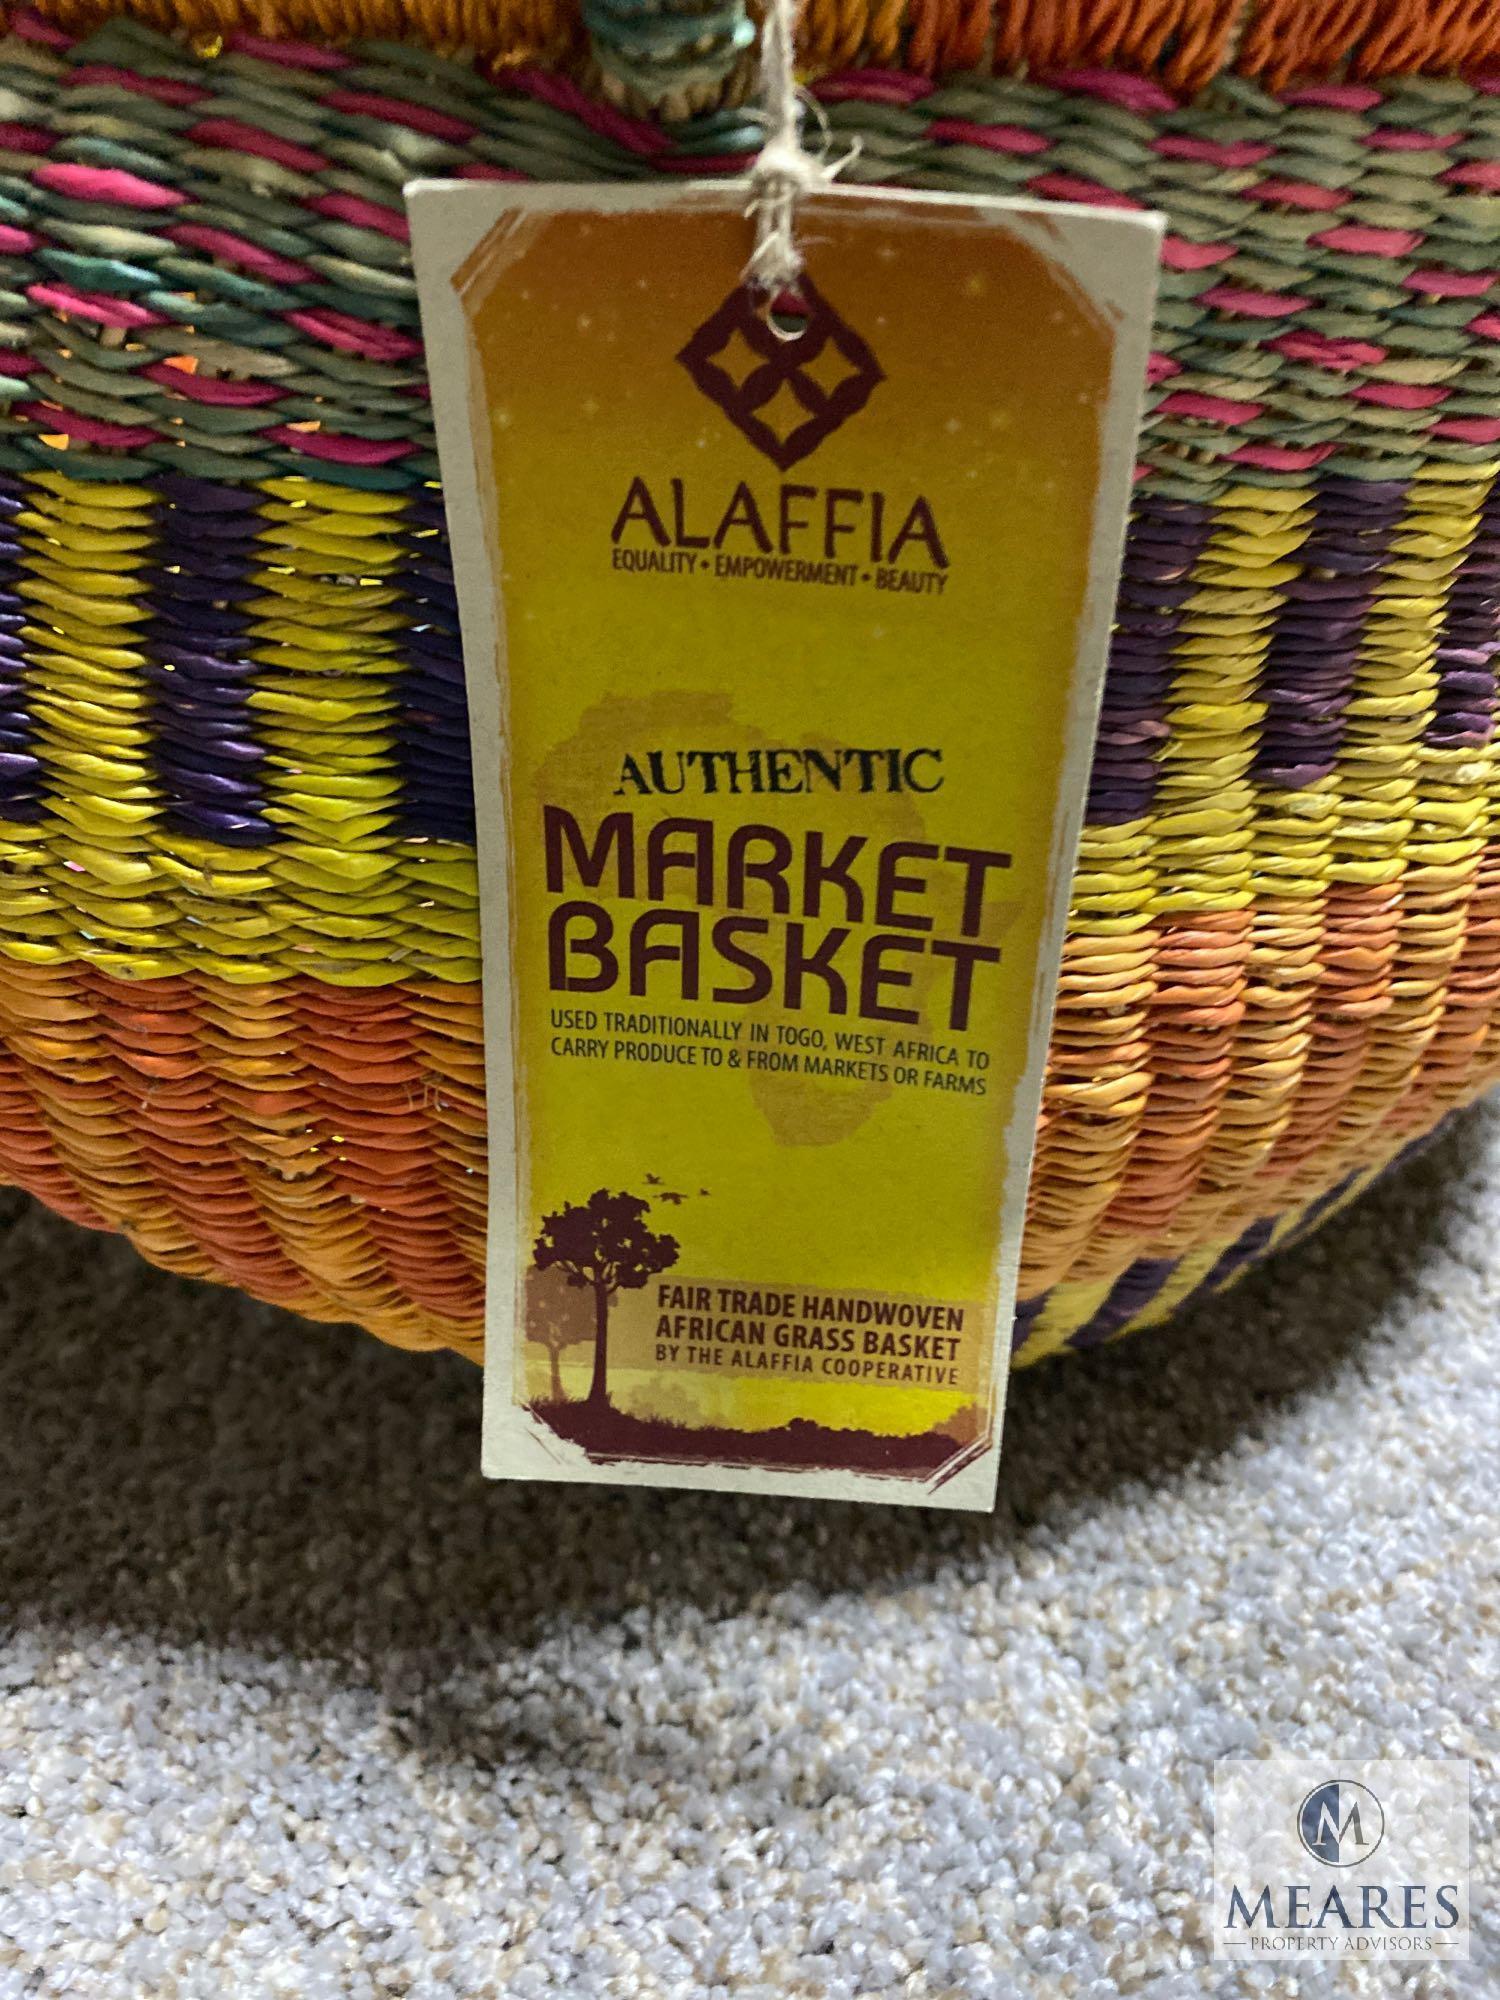 Fabric Covered Wire Baskets and African Market Basket